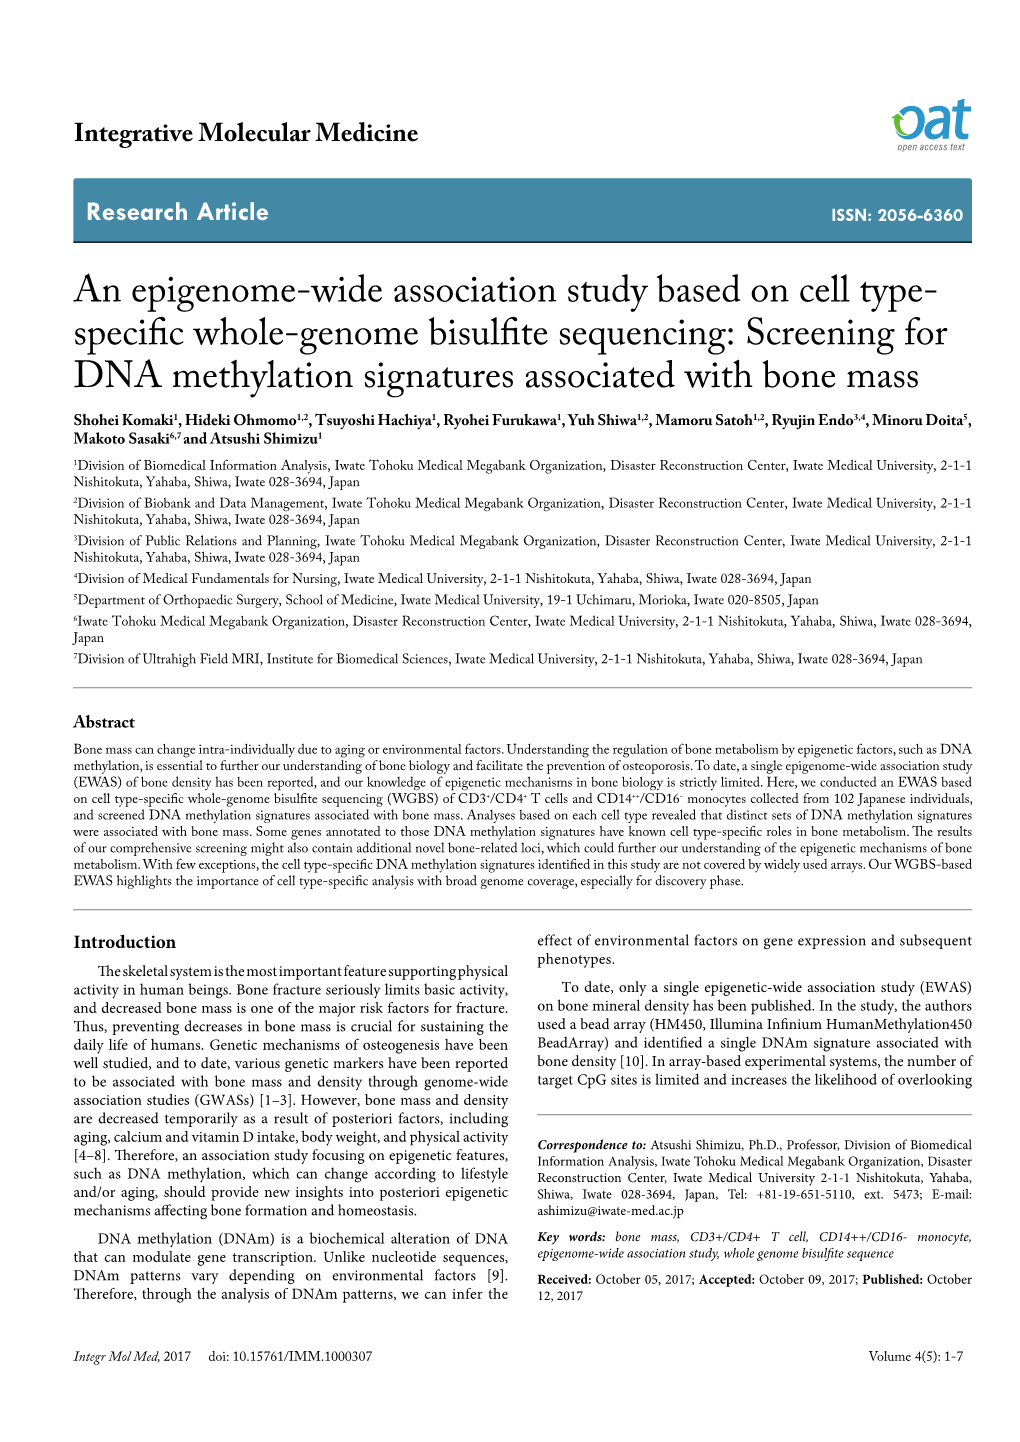 An Epigenome-Wide Association Study Based on Cell Type